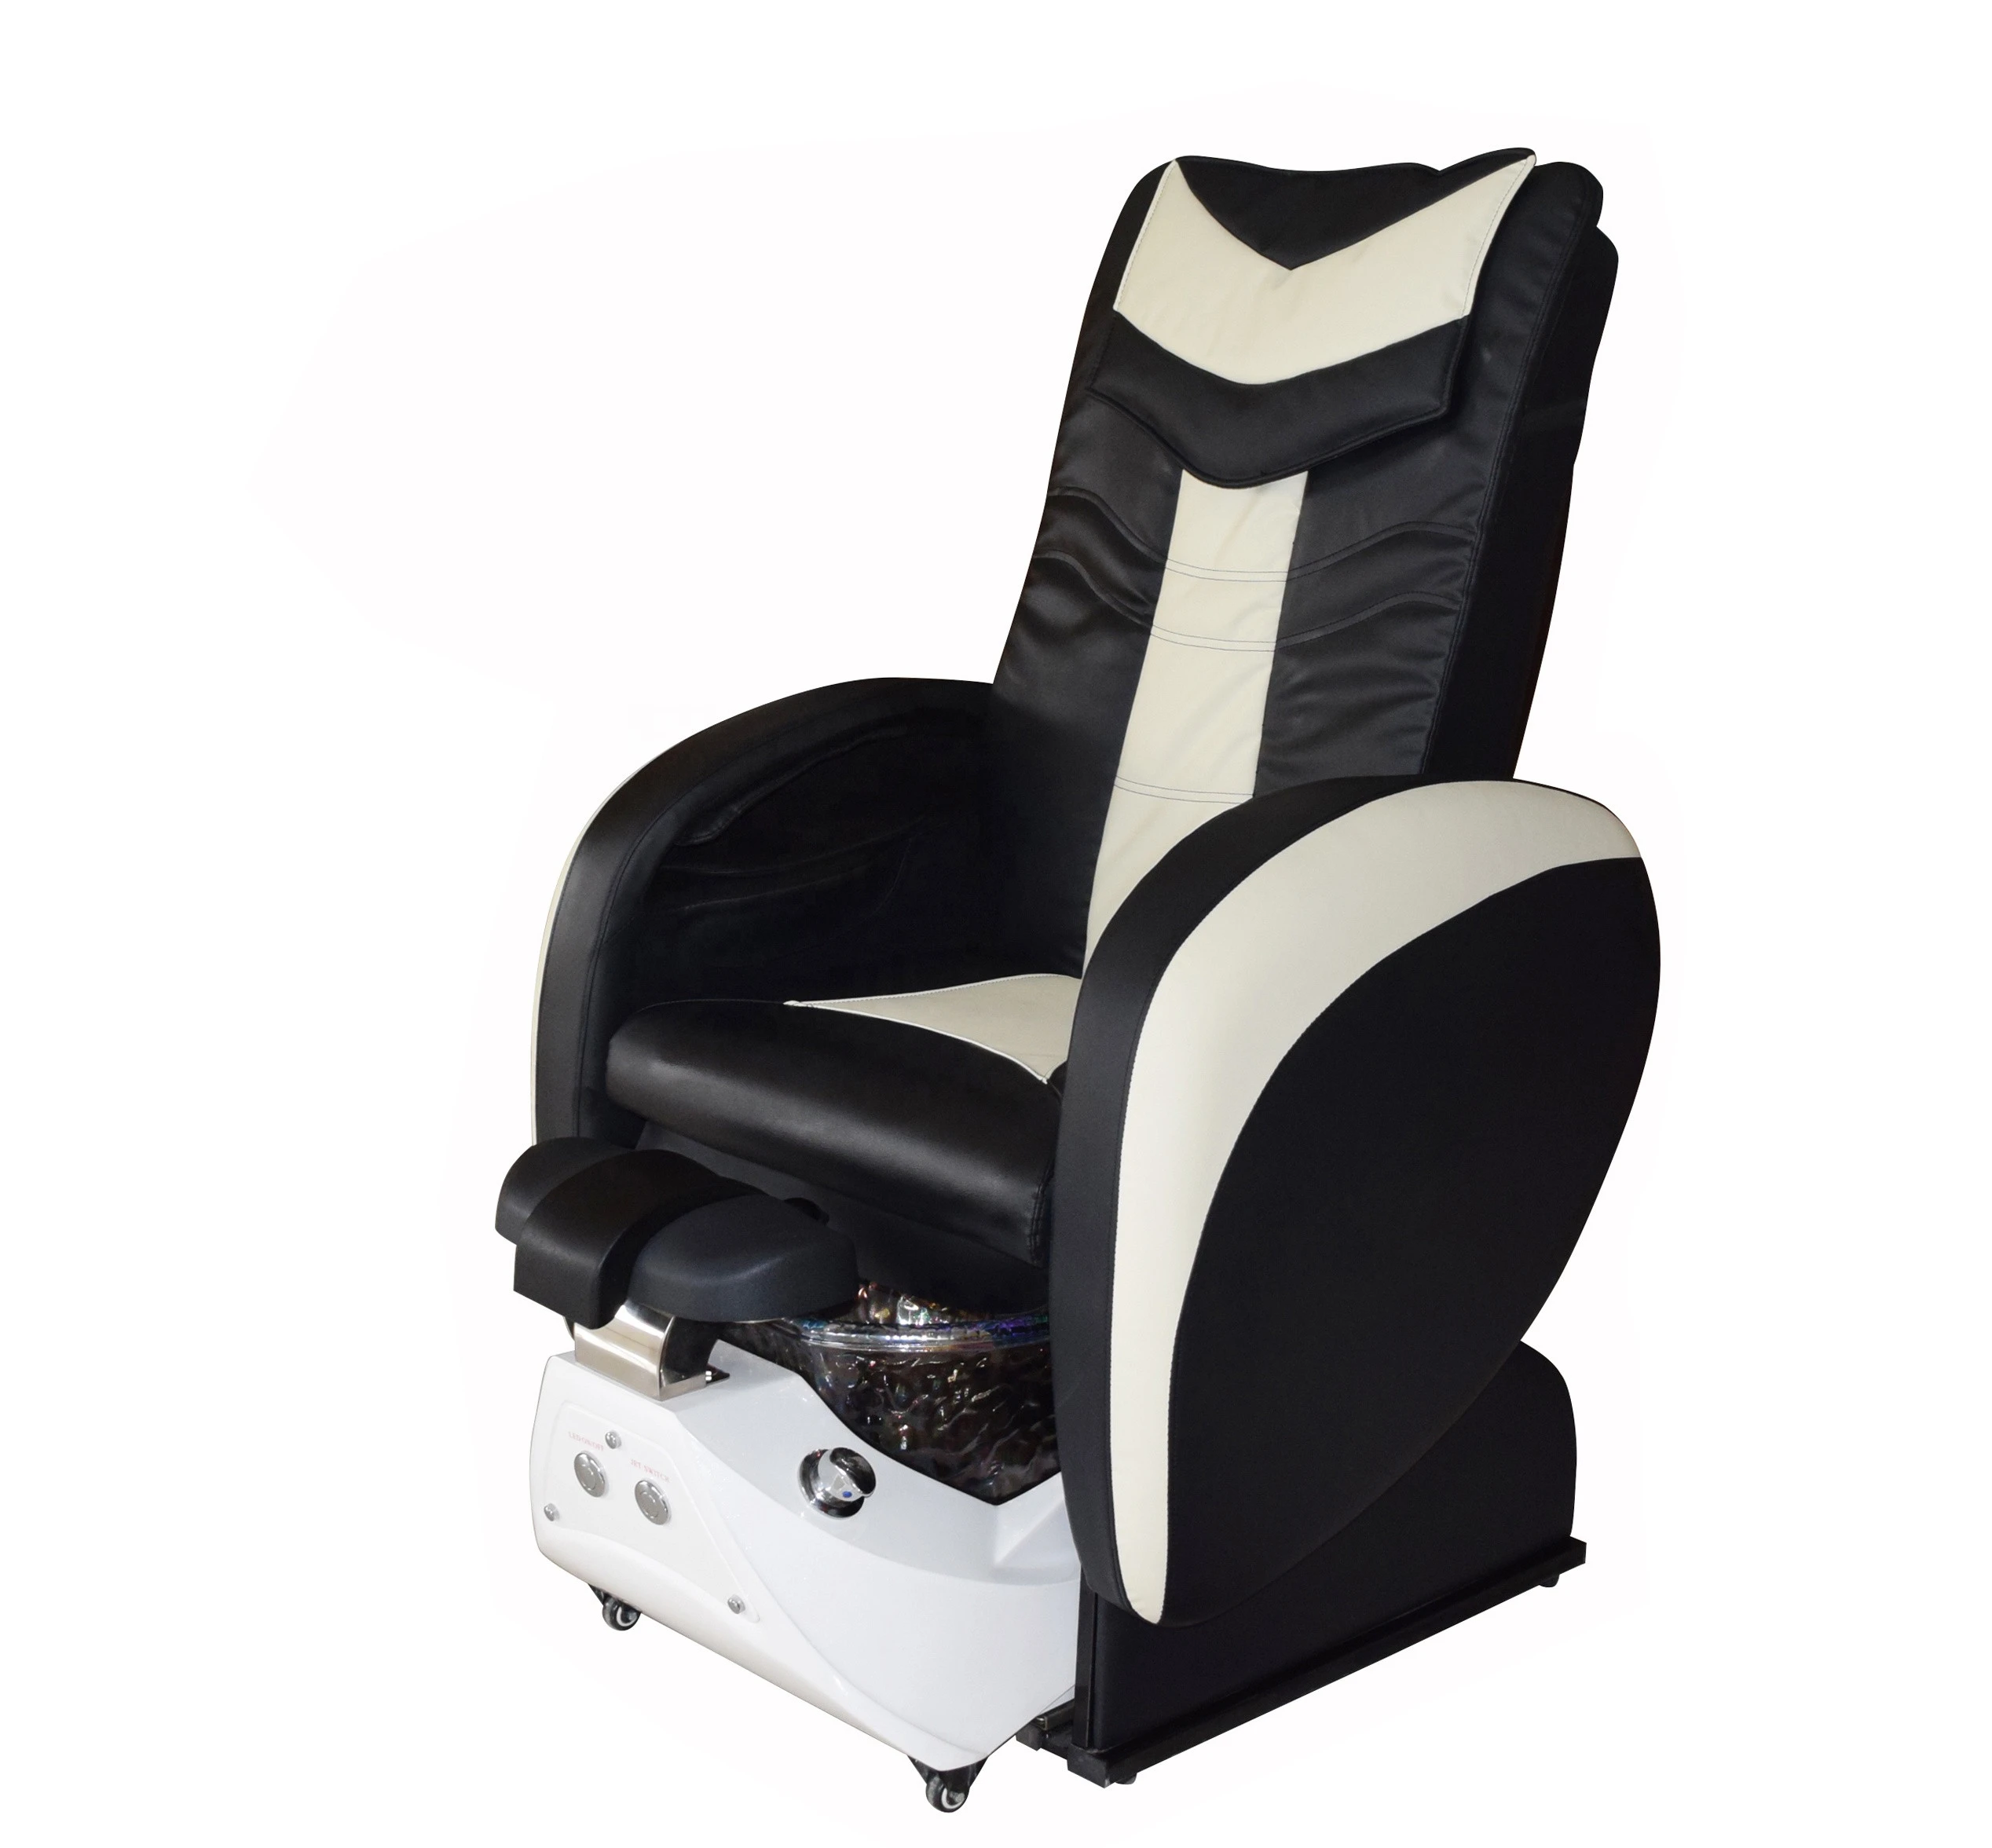 new arrival Retractable basin pedicure chair luxury / save space pedicure chair spa